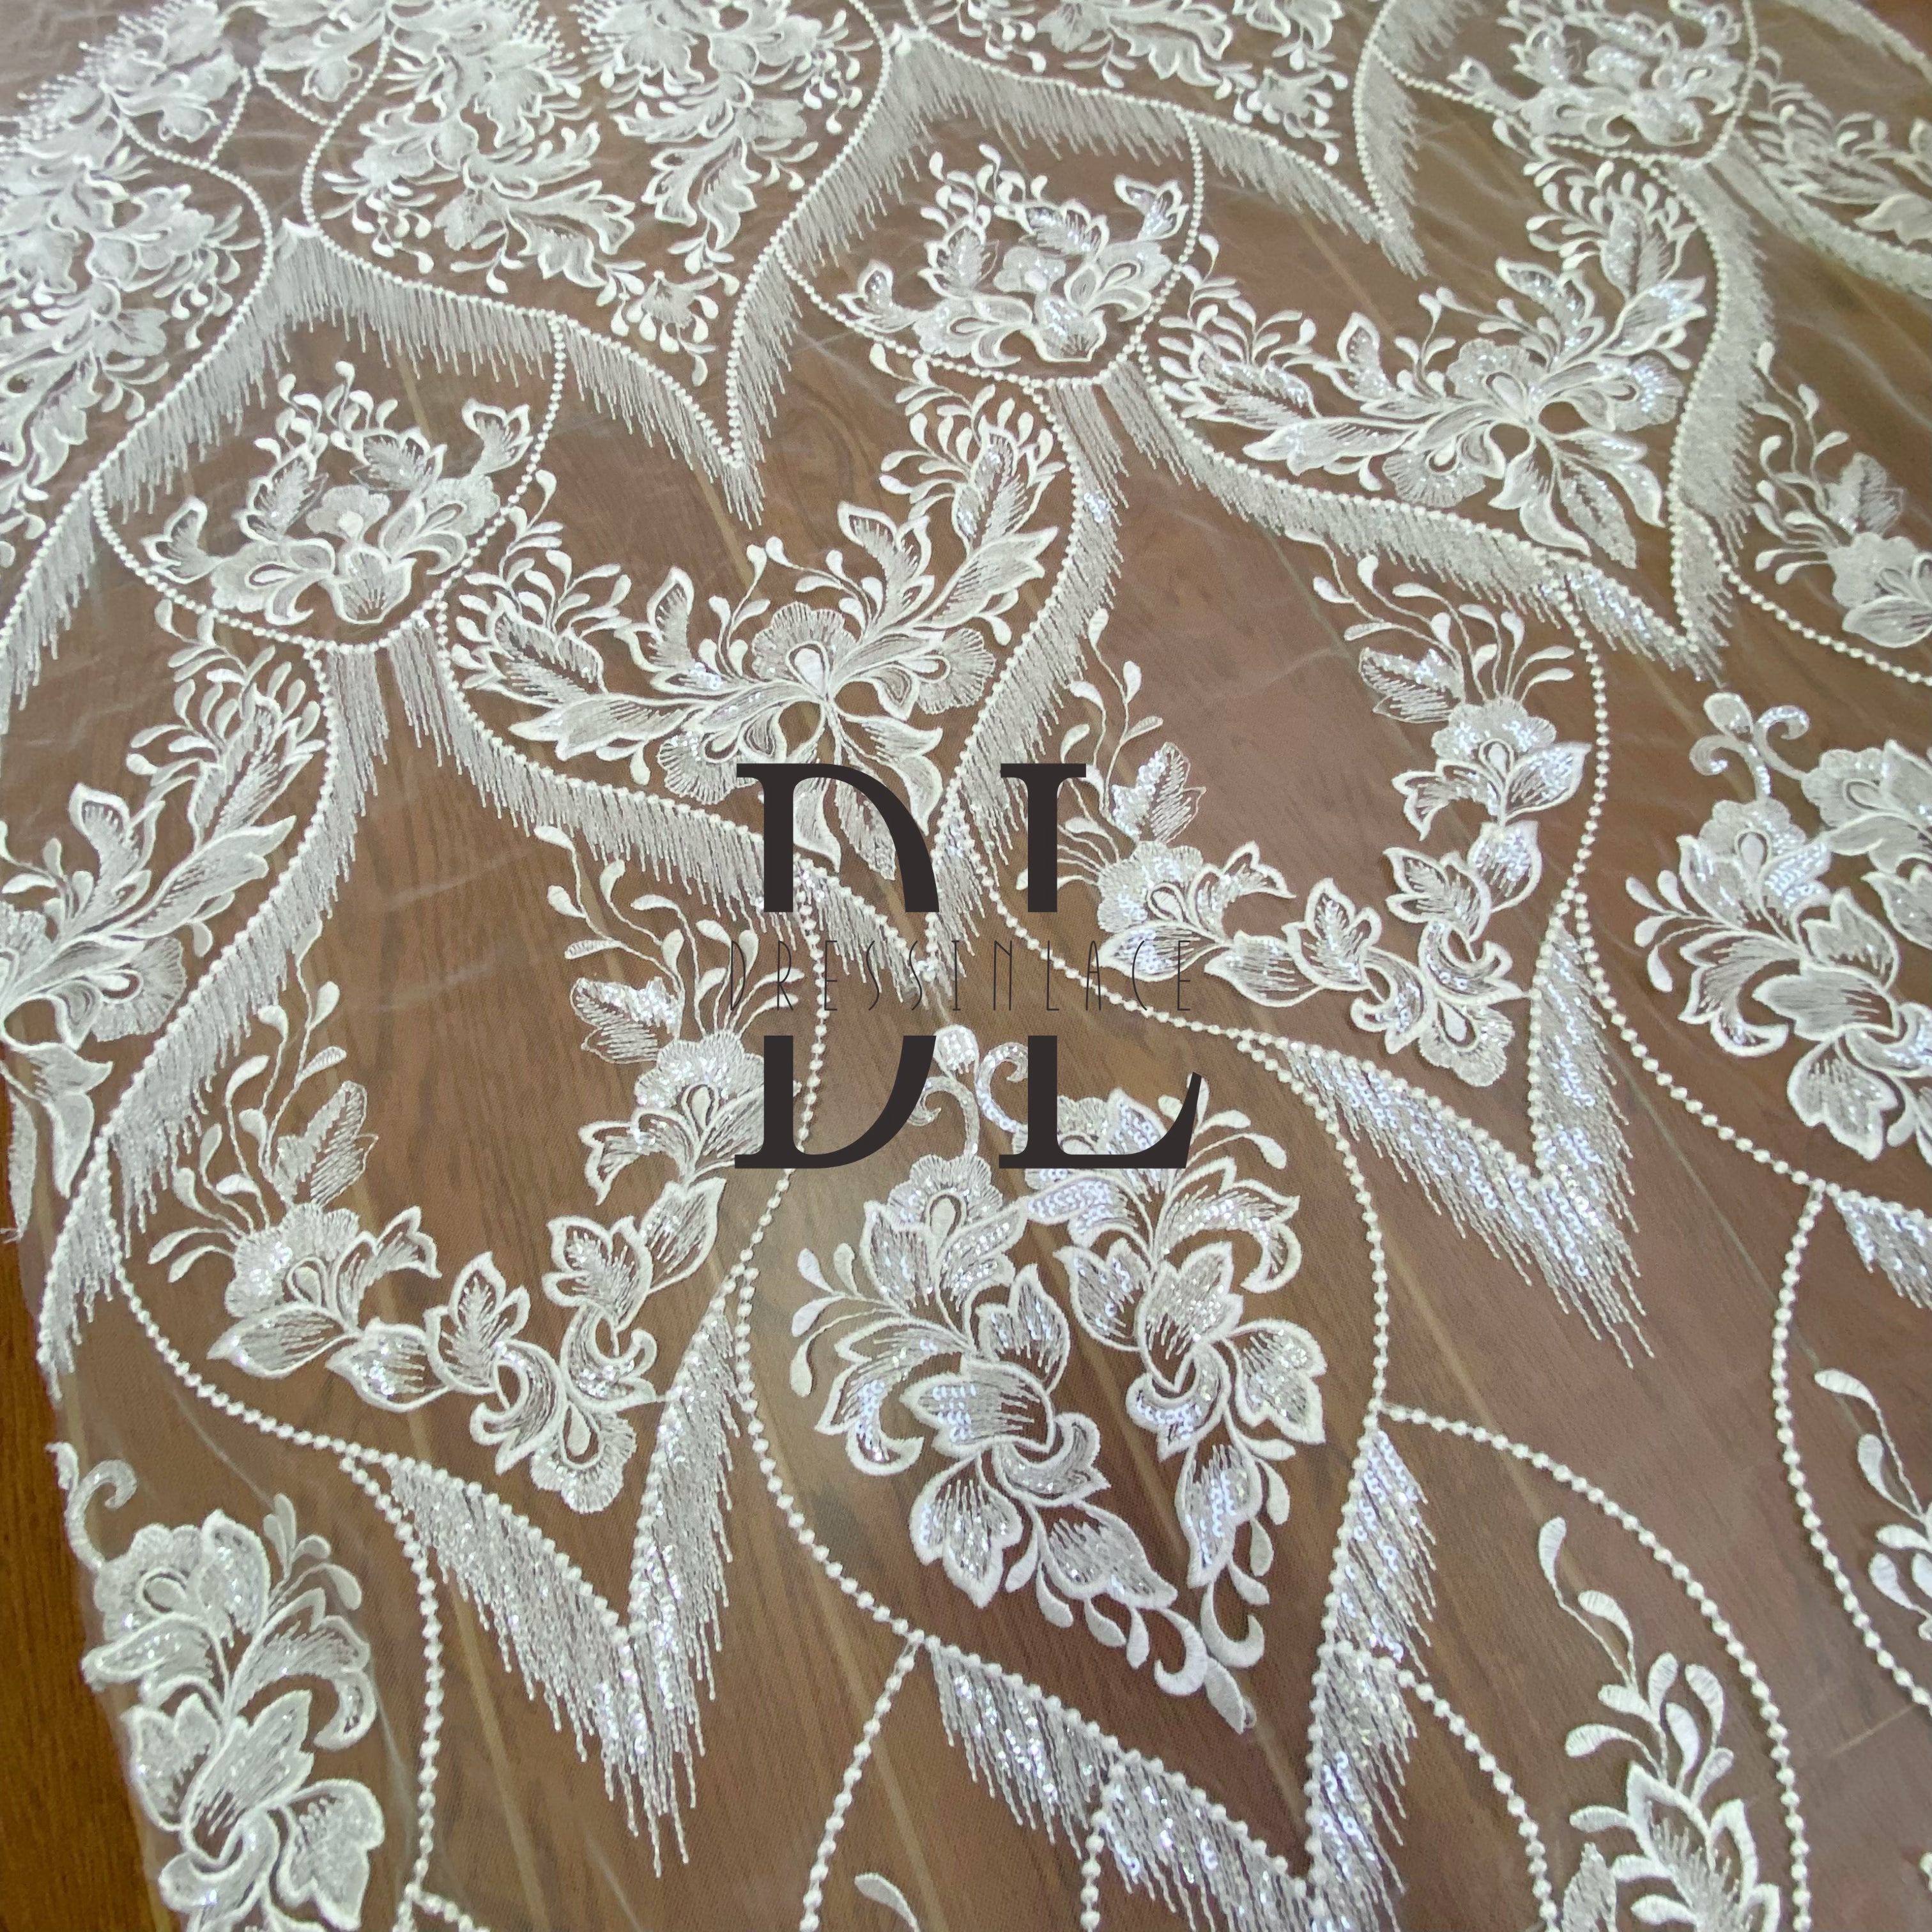 DL130135 Embroidery Lace Fabric for Bridal Wedding Dresses – Shiny Transparent with Soft, Skin-Friendly Mesh DL130135